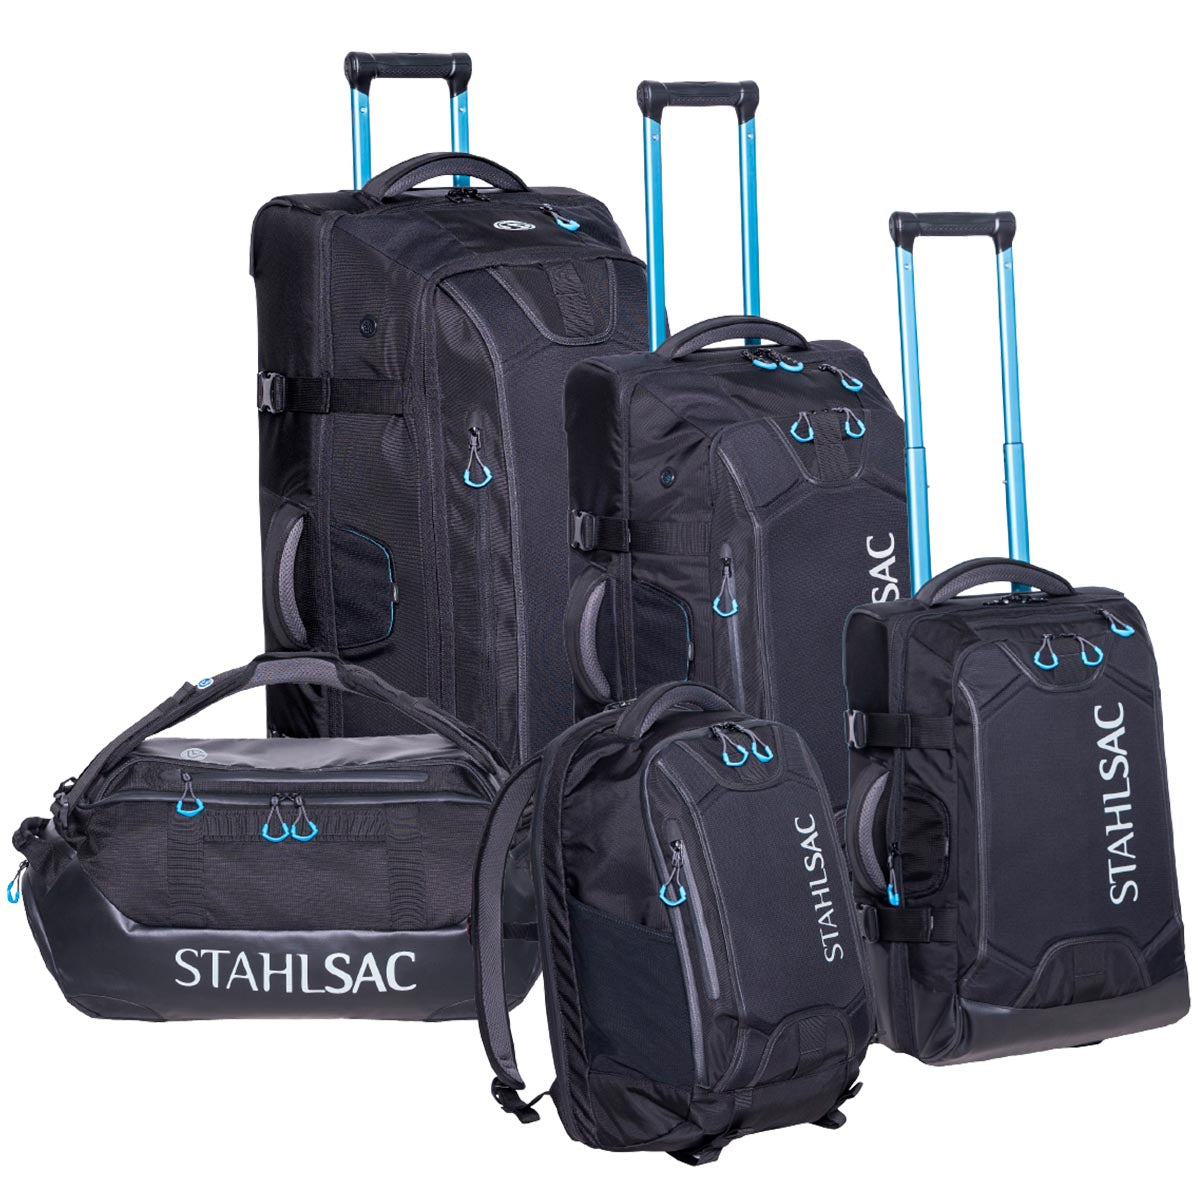 Stahlsac Stahlsac Steel Duffel Bag by Oyster Diving Shop